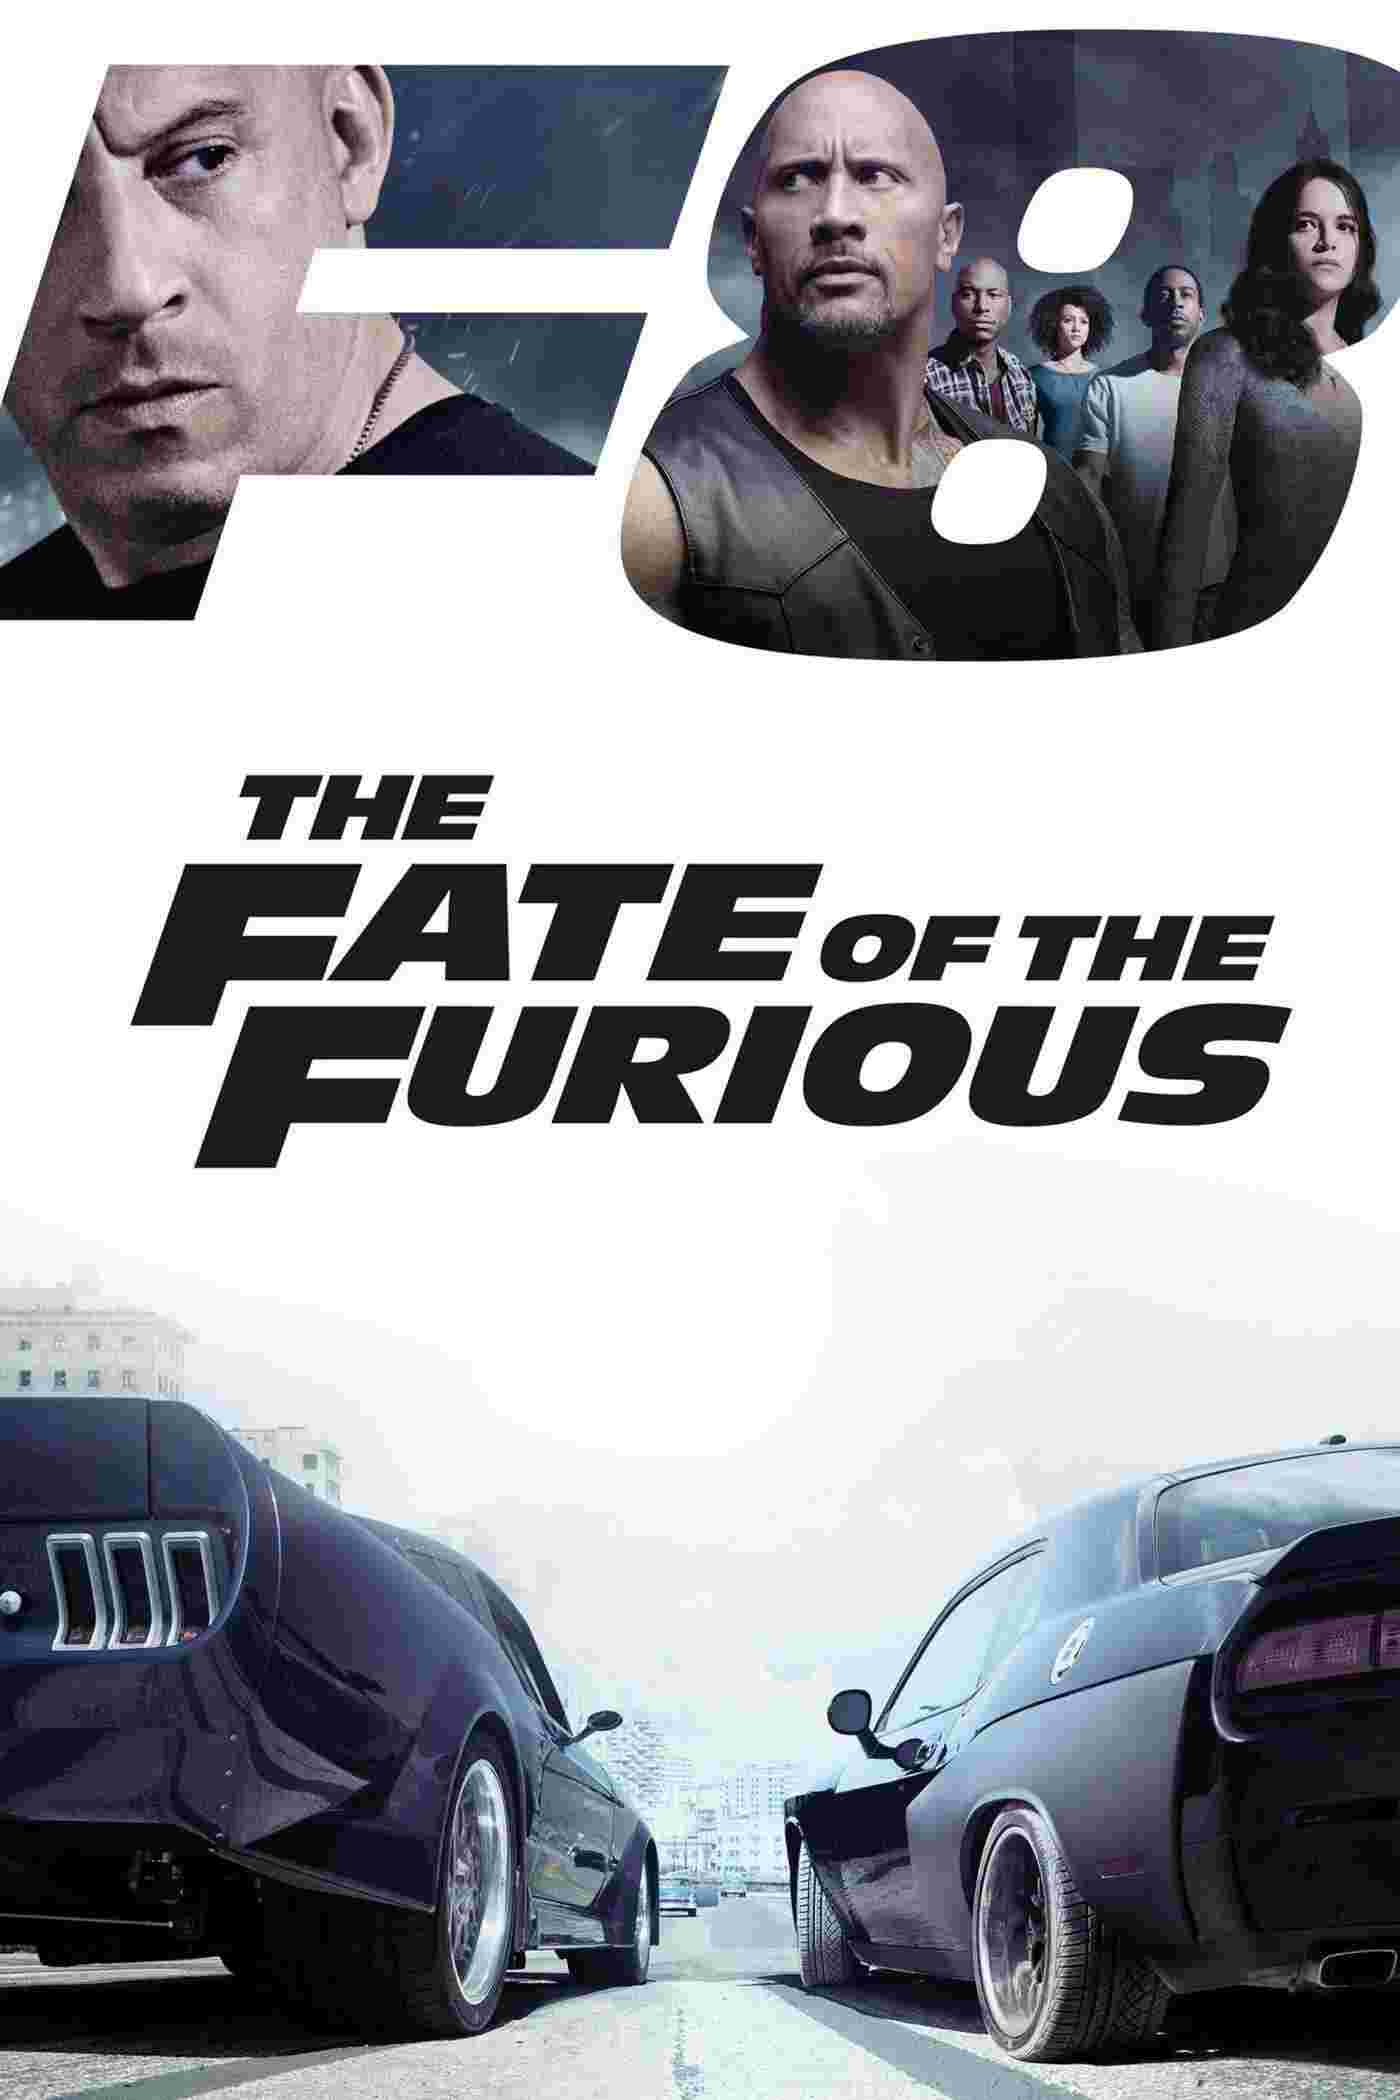 The Fate of the Furious (2017) Vin Diesel